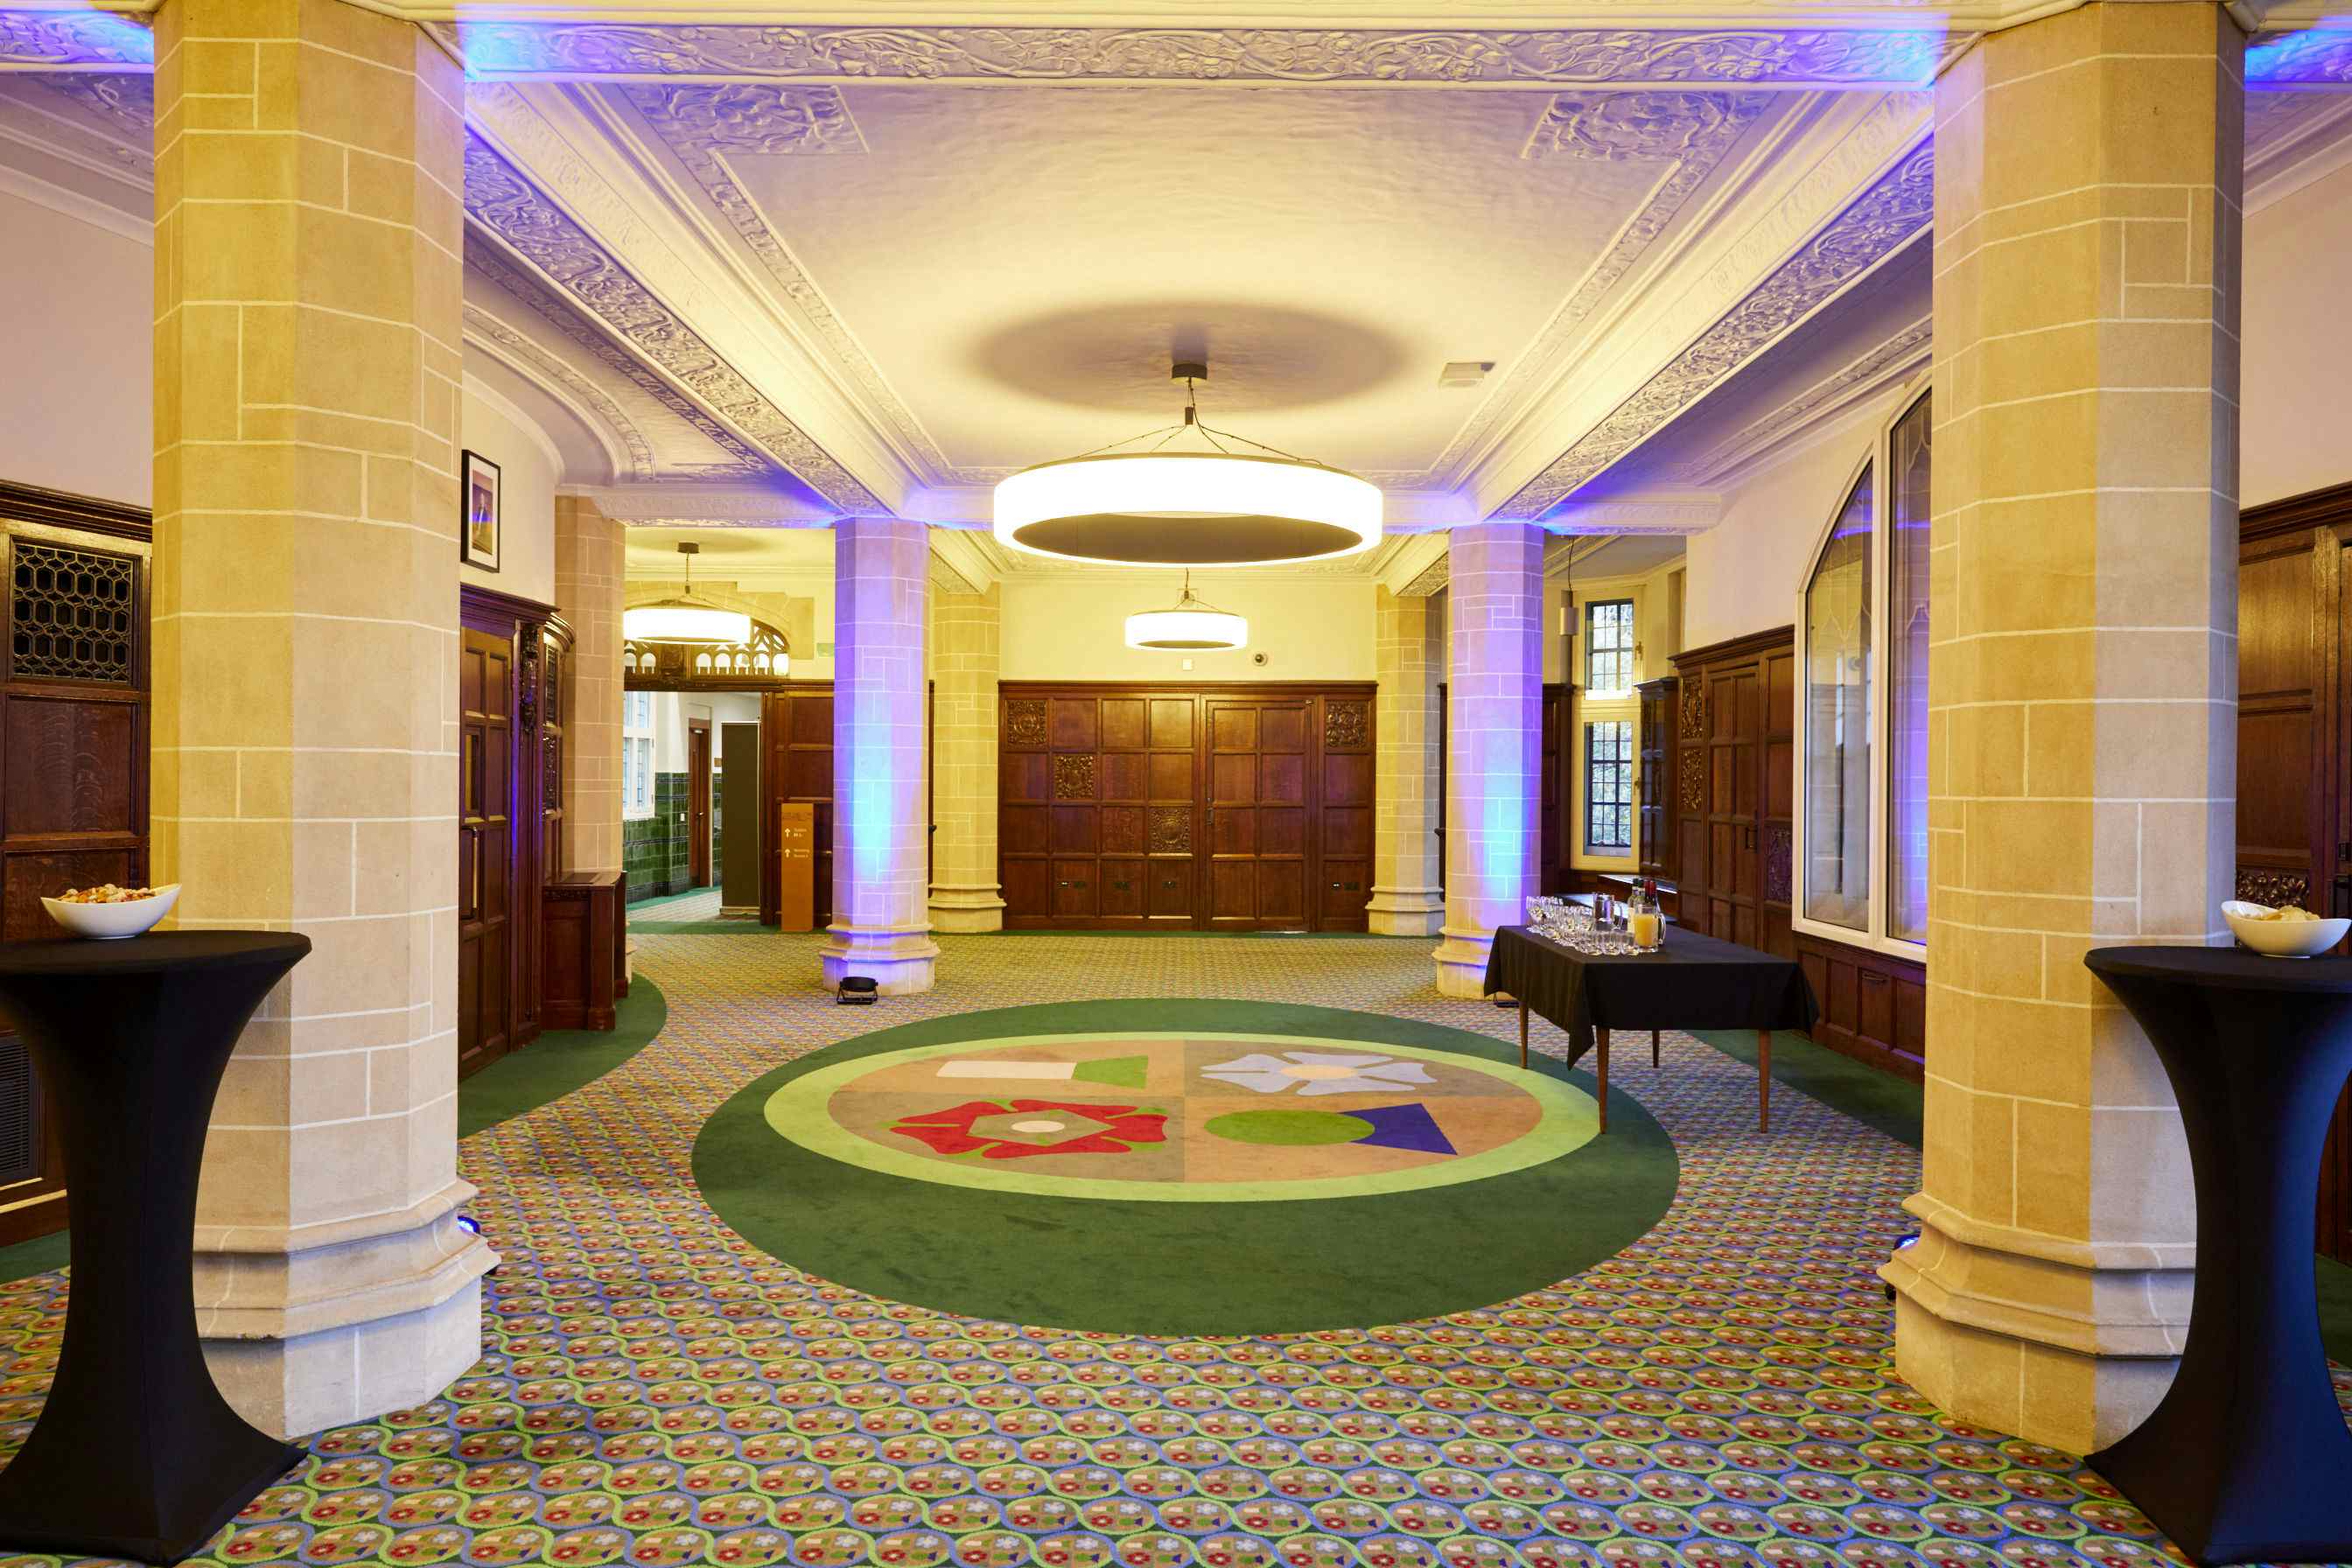 The Lobby, Evening Hire, The Supreme Court of the United Kingdom